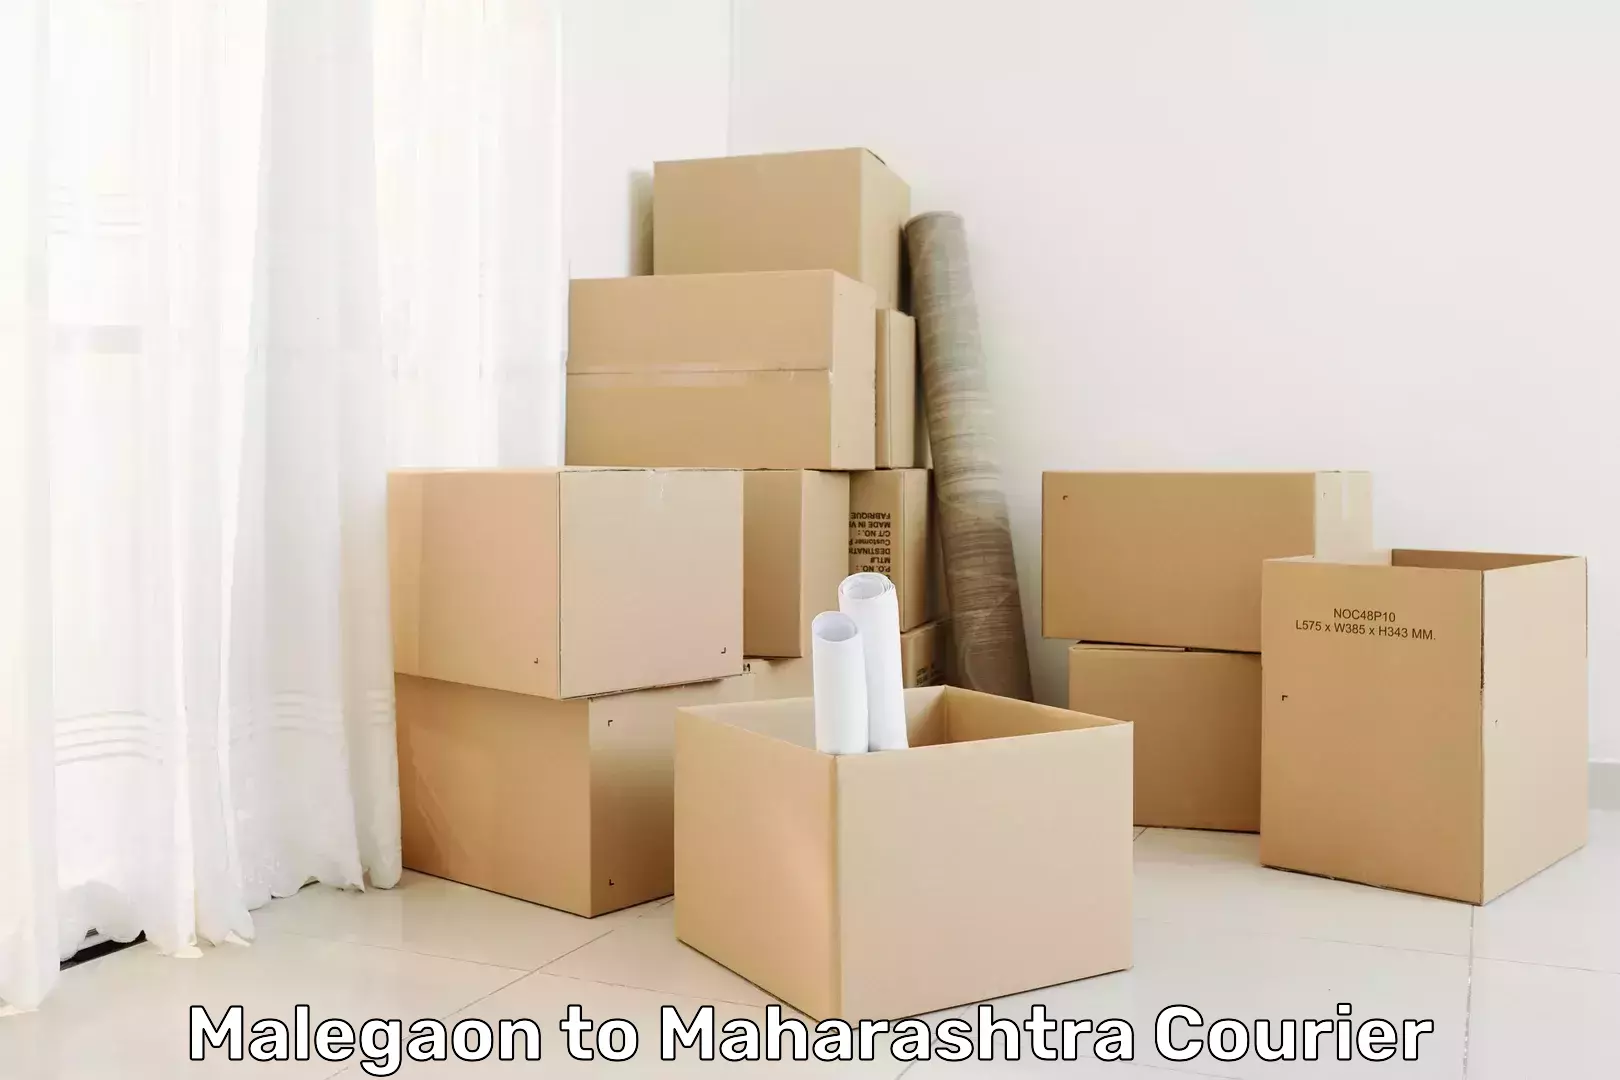 Courier service innovation Malegaon to Kopargaon